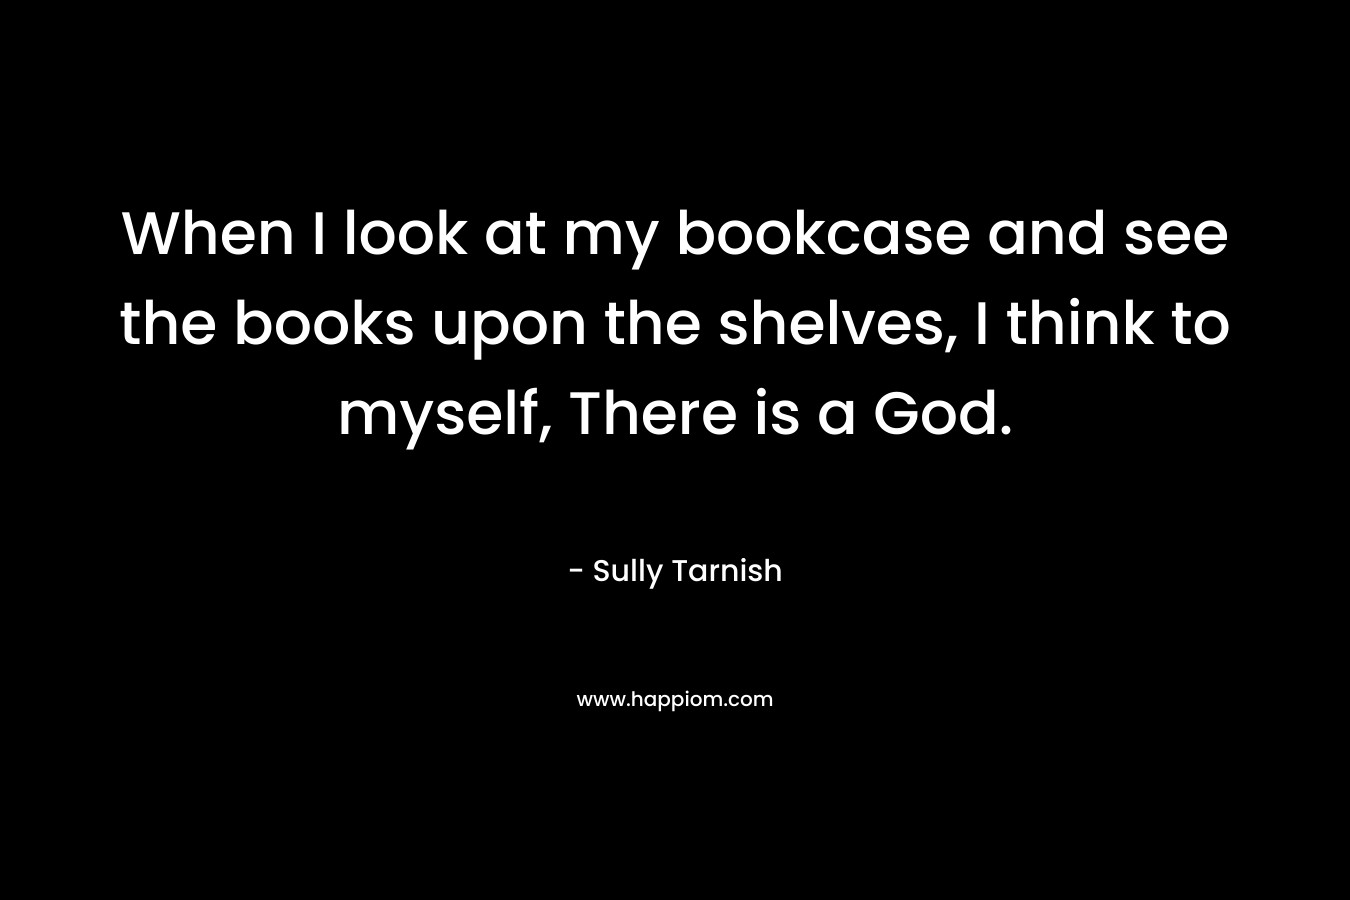 When I look at my bookcase and see the books upon the shelves, I think to myself, There is a God. – Sully Tarnish